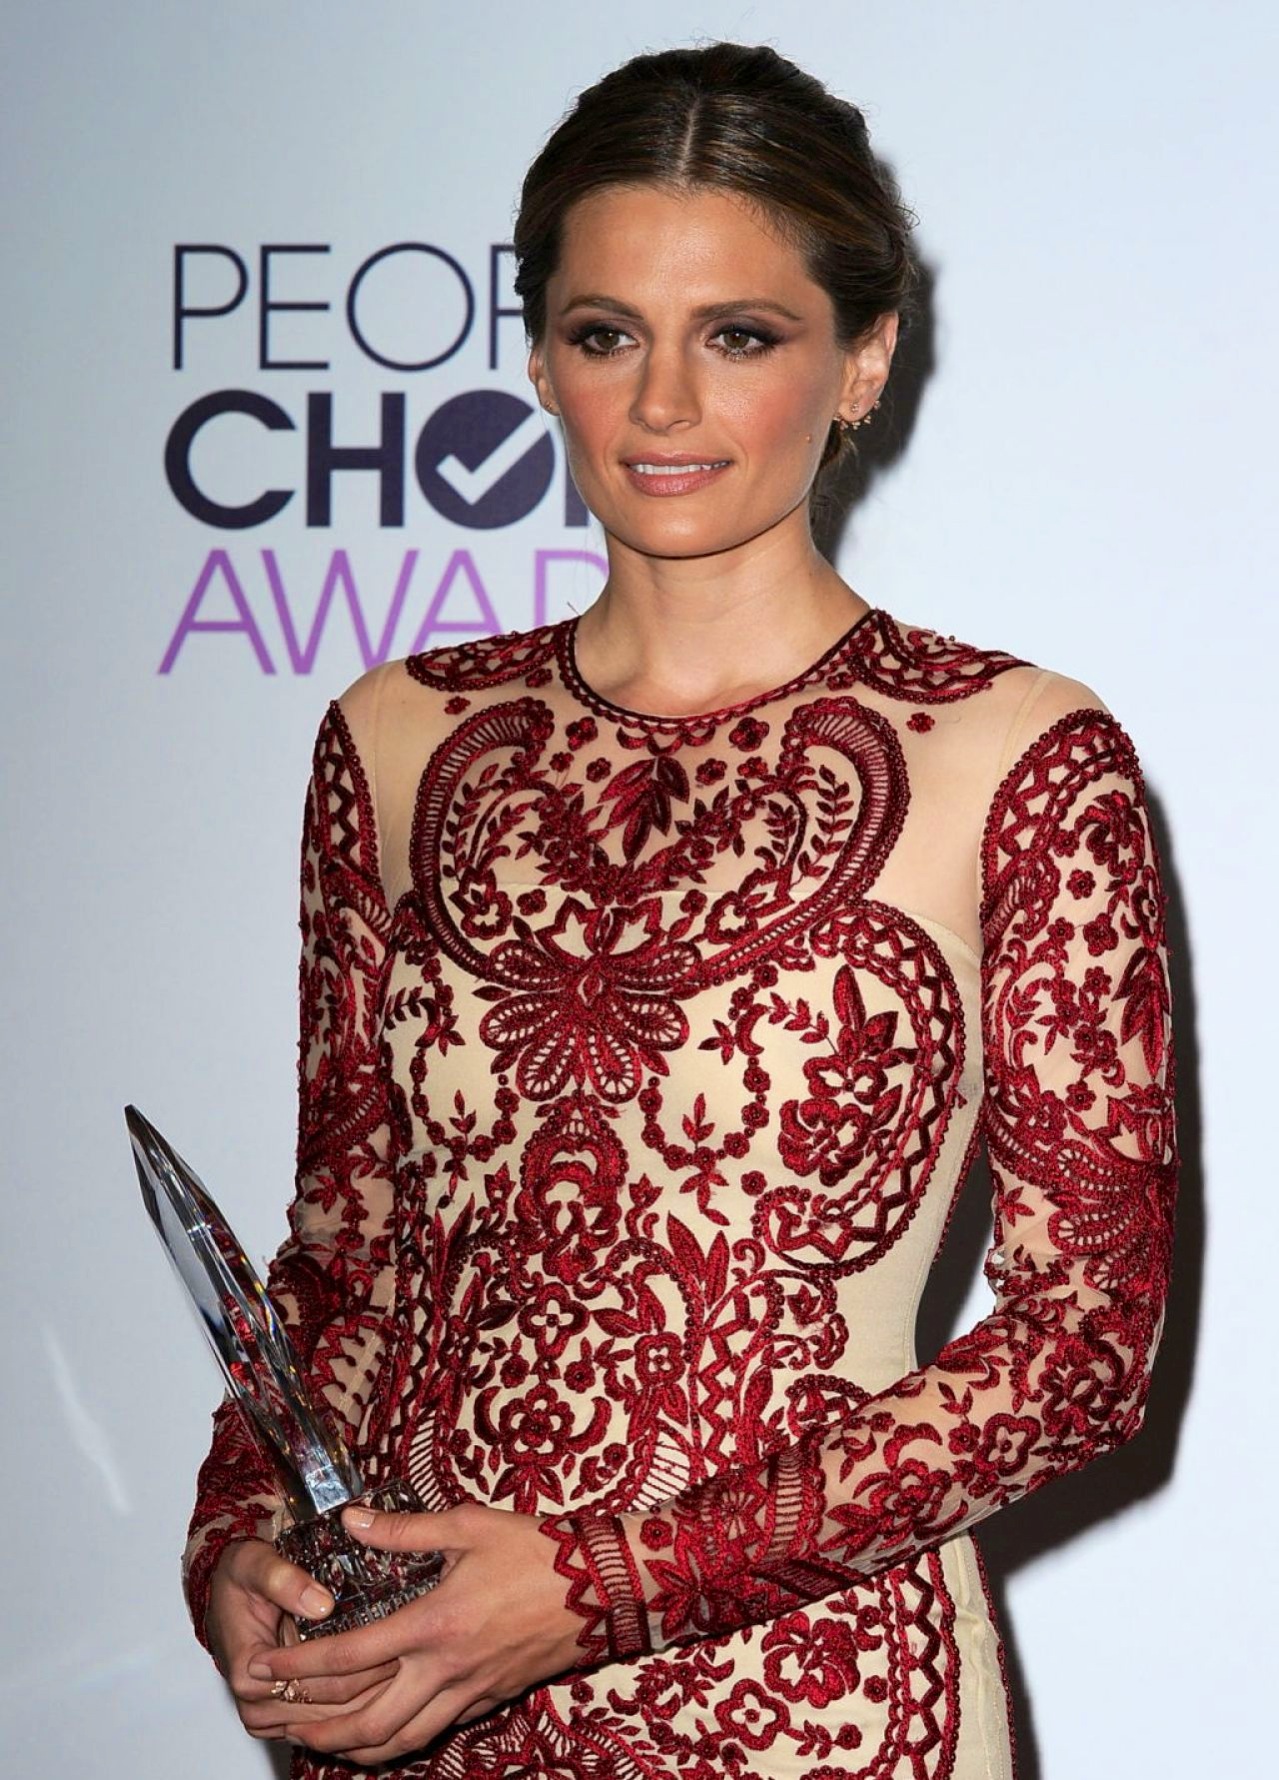 Castle’s Third Win & Stana Katic at 2014 People’s Choice Awards